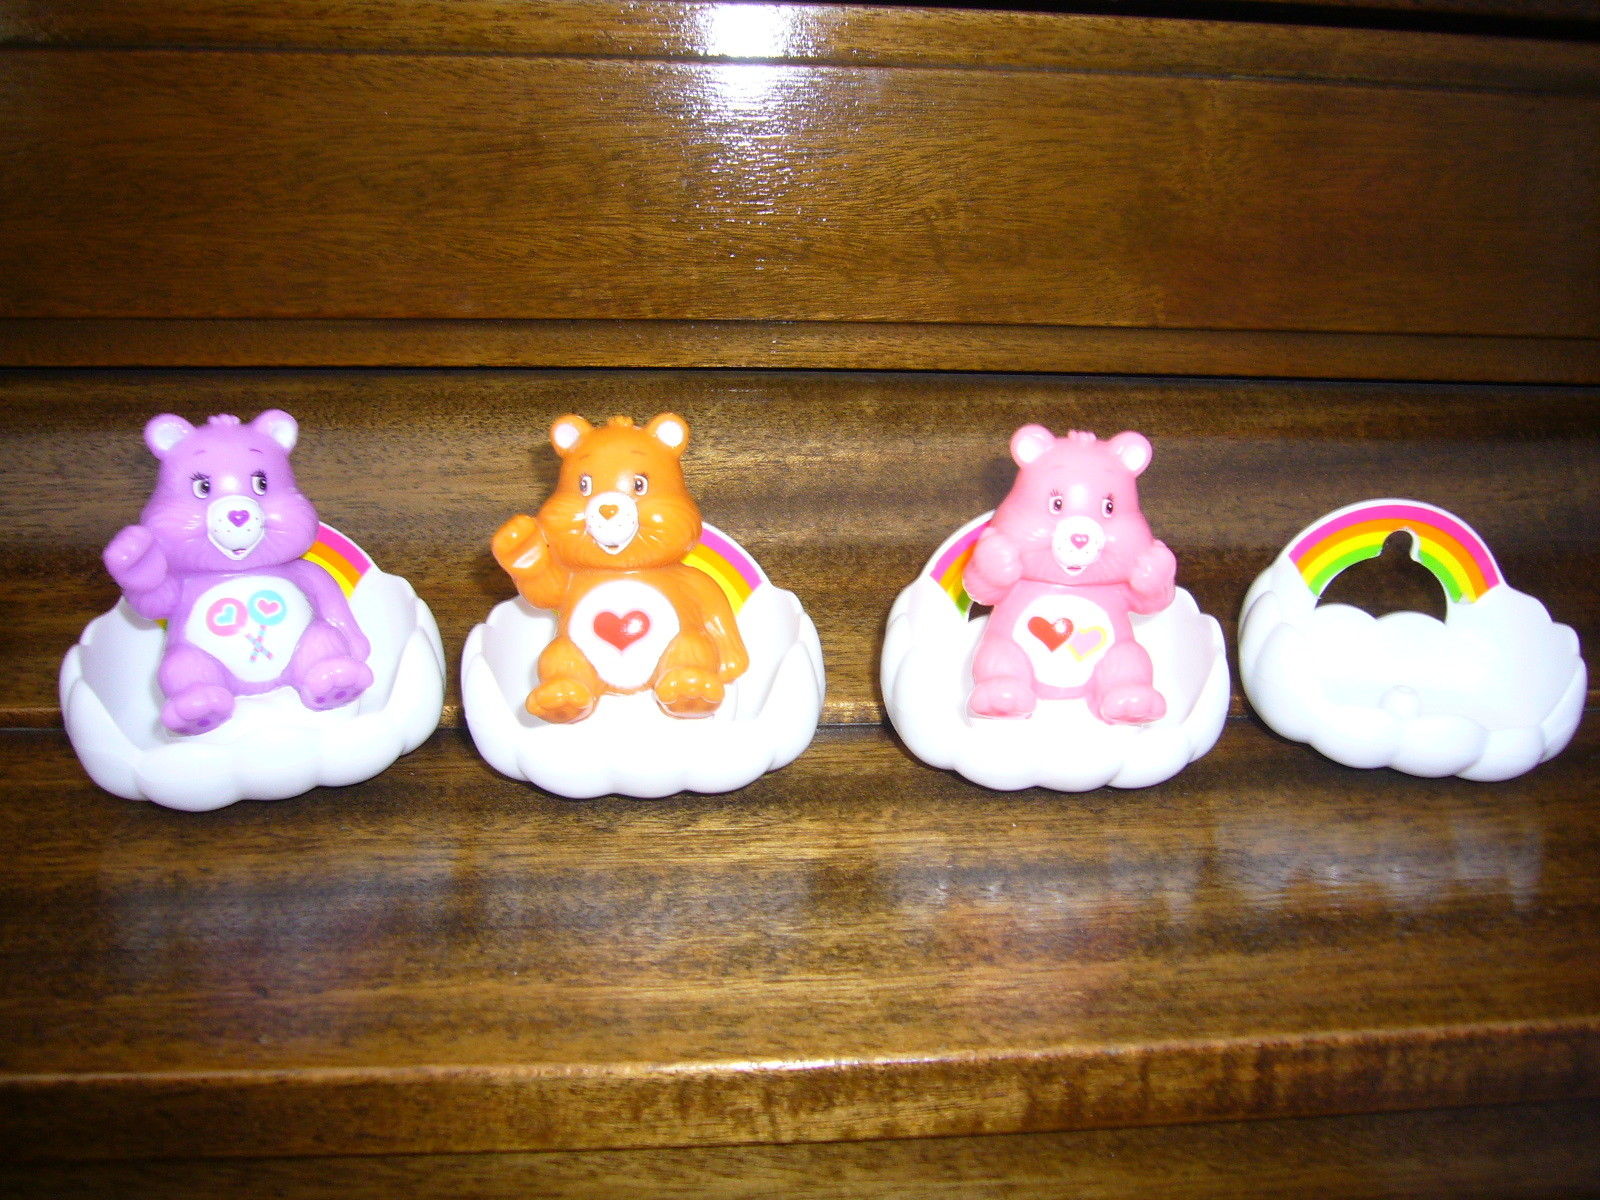 Care Bears Figures 2.5 inch Sitting on clouds and in clouds